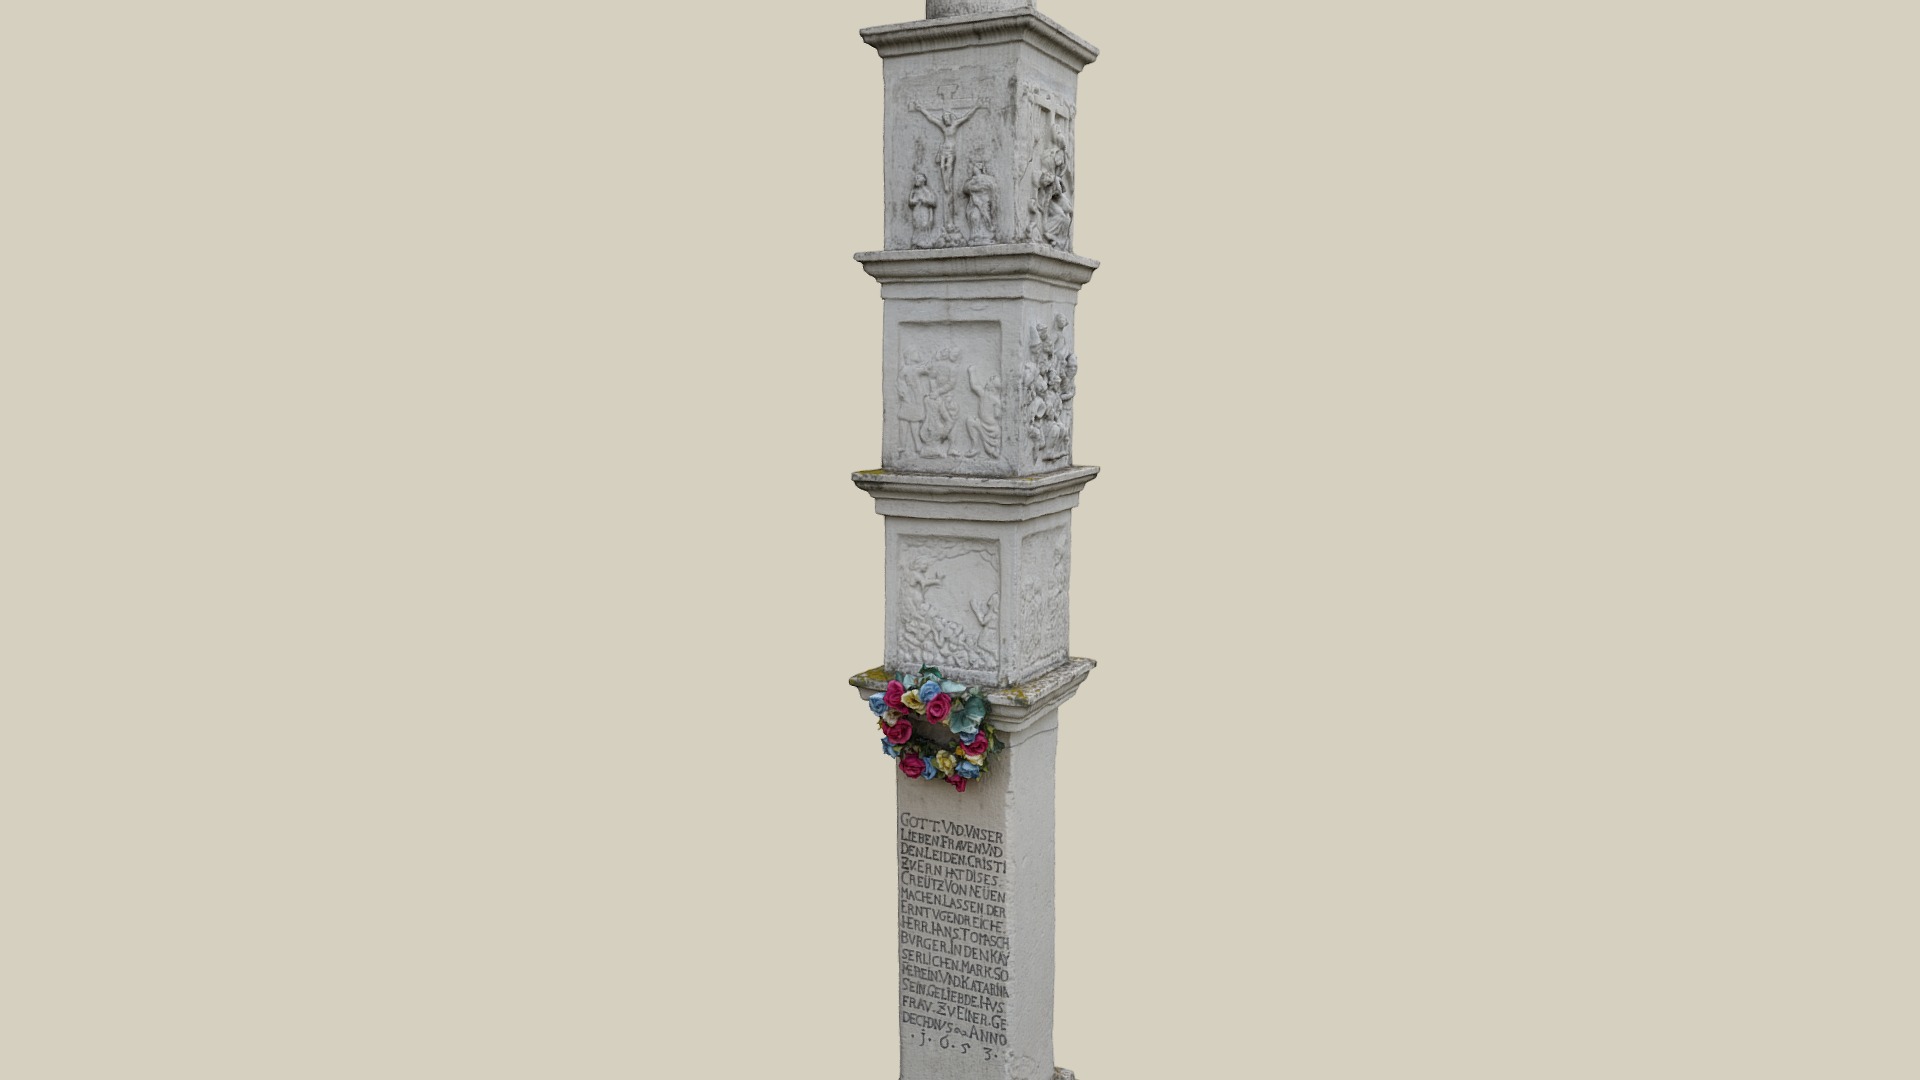 3D model Passionspfeiler - This is a 3D model of the Passionspfeiler. The 3D model is about a tall stone pillar with a flower painted on it.